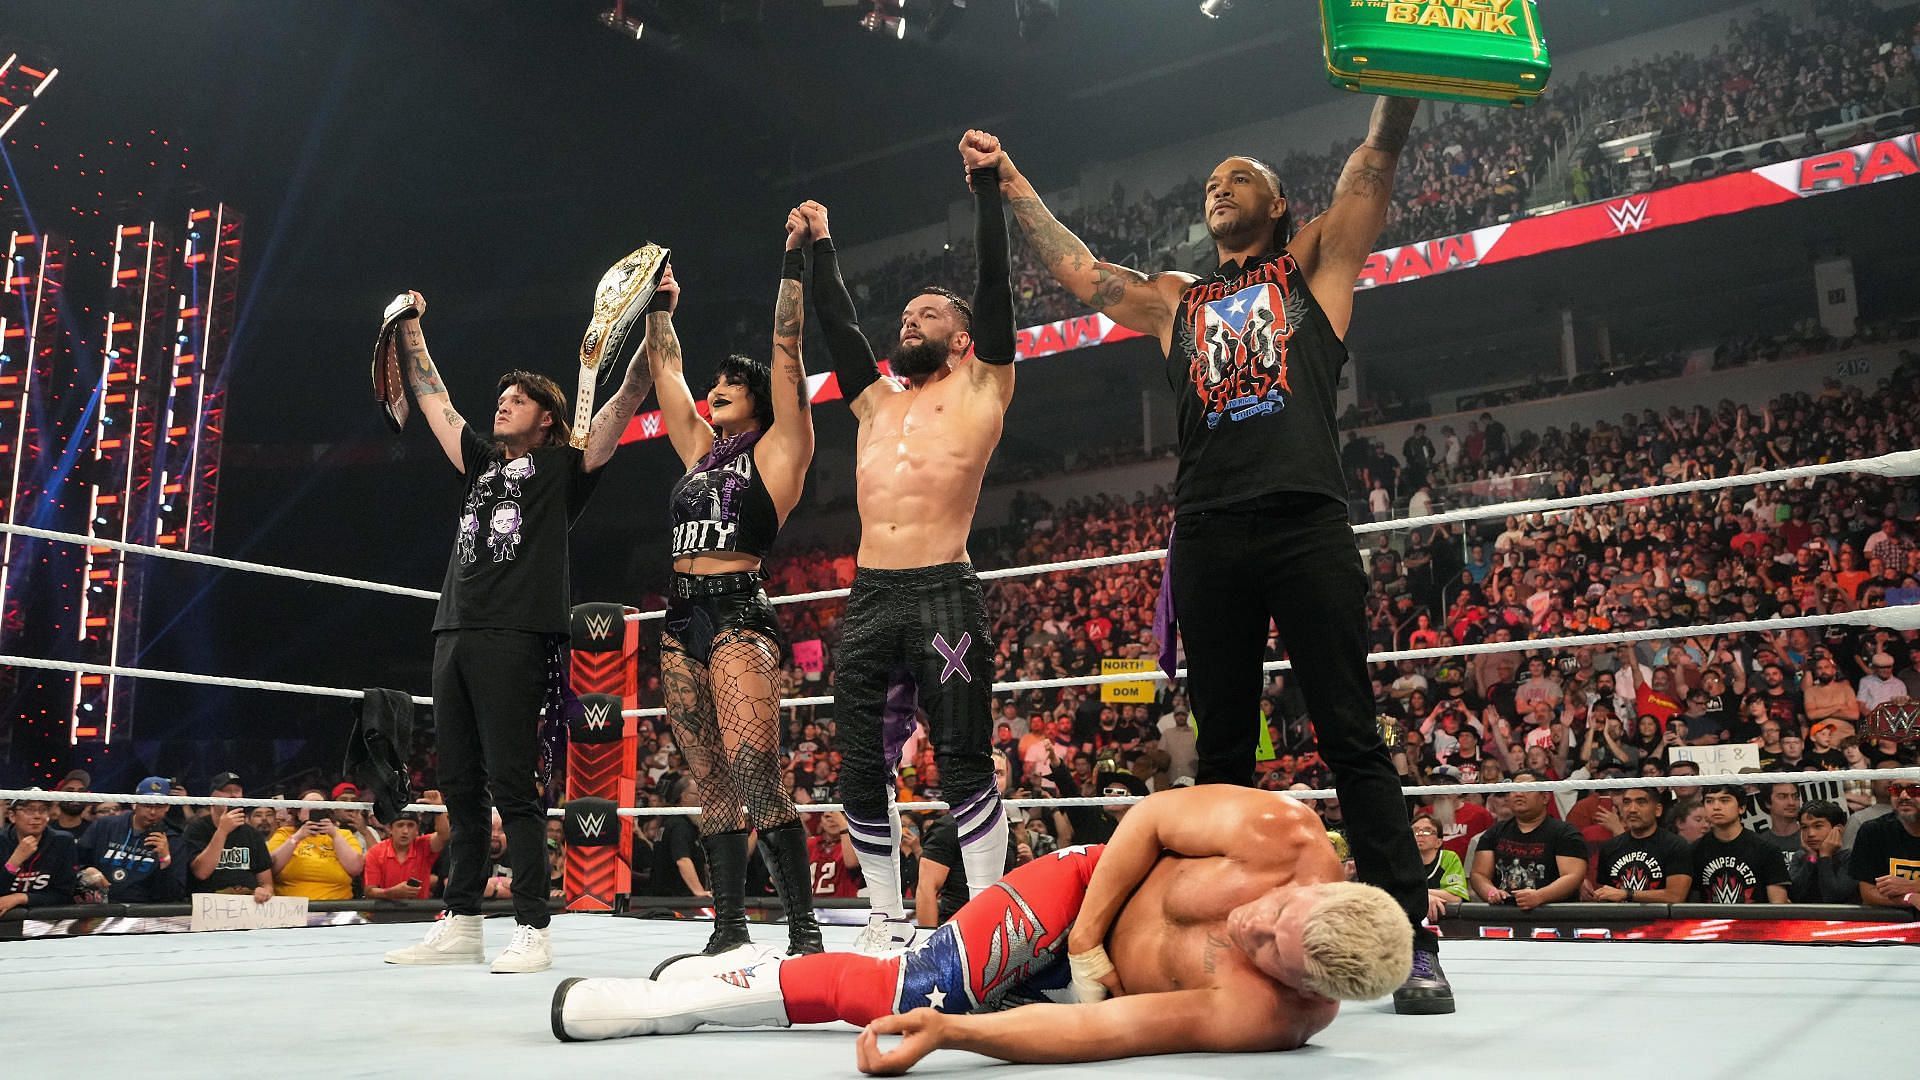 The Judgment Day destroyed Cody Rhodes to close out RAW